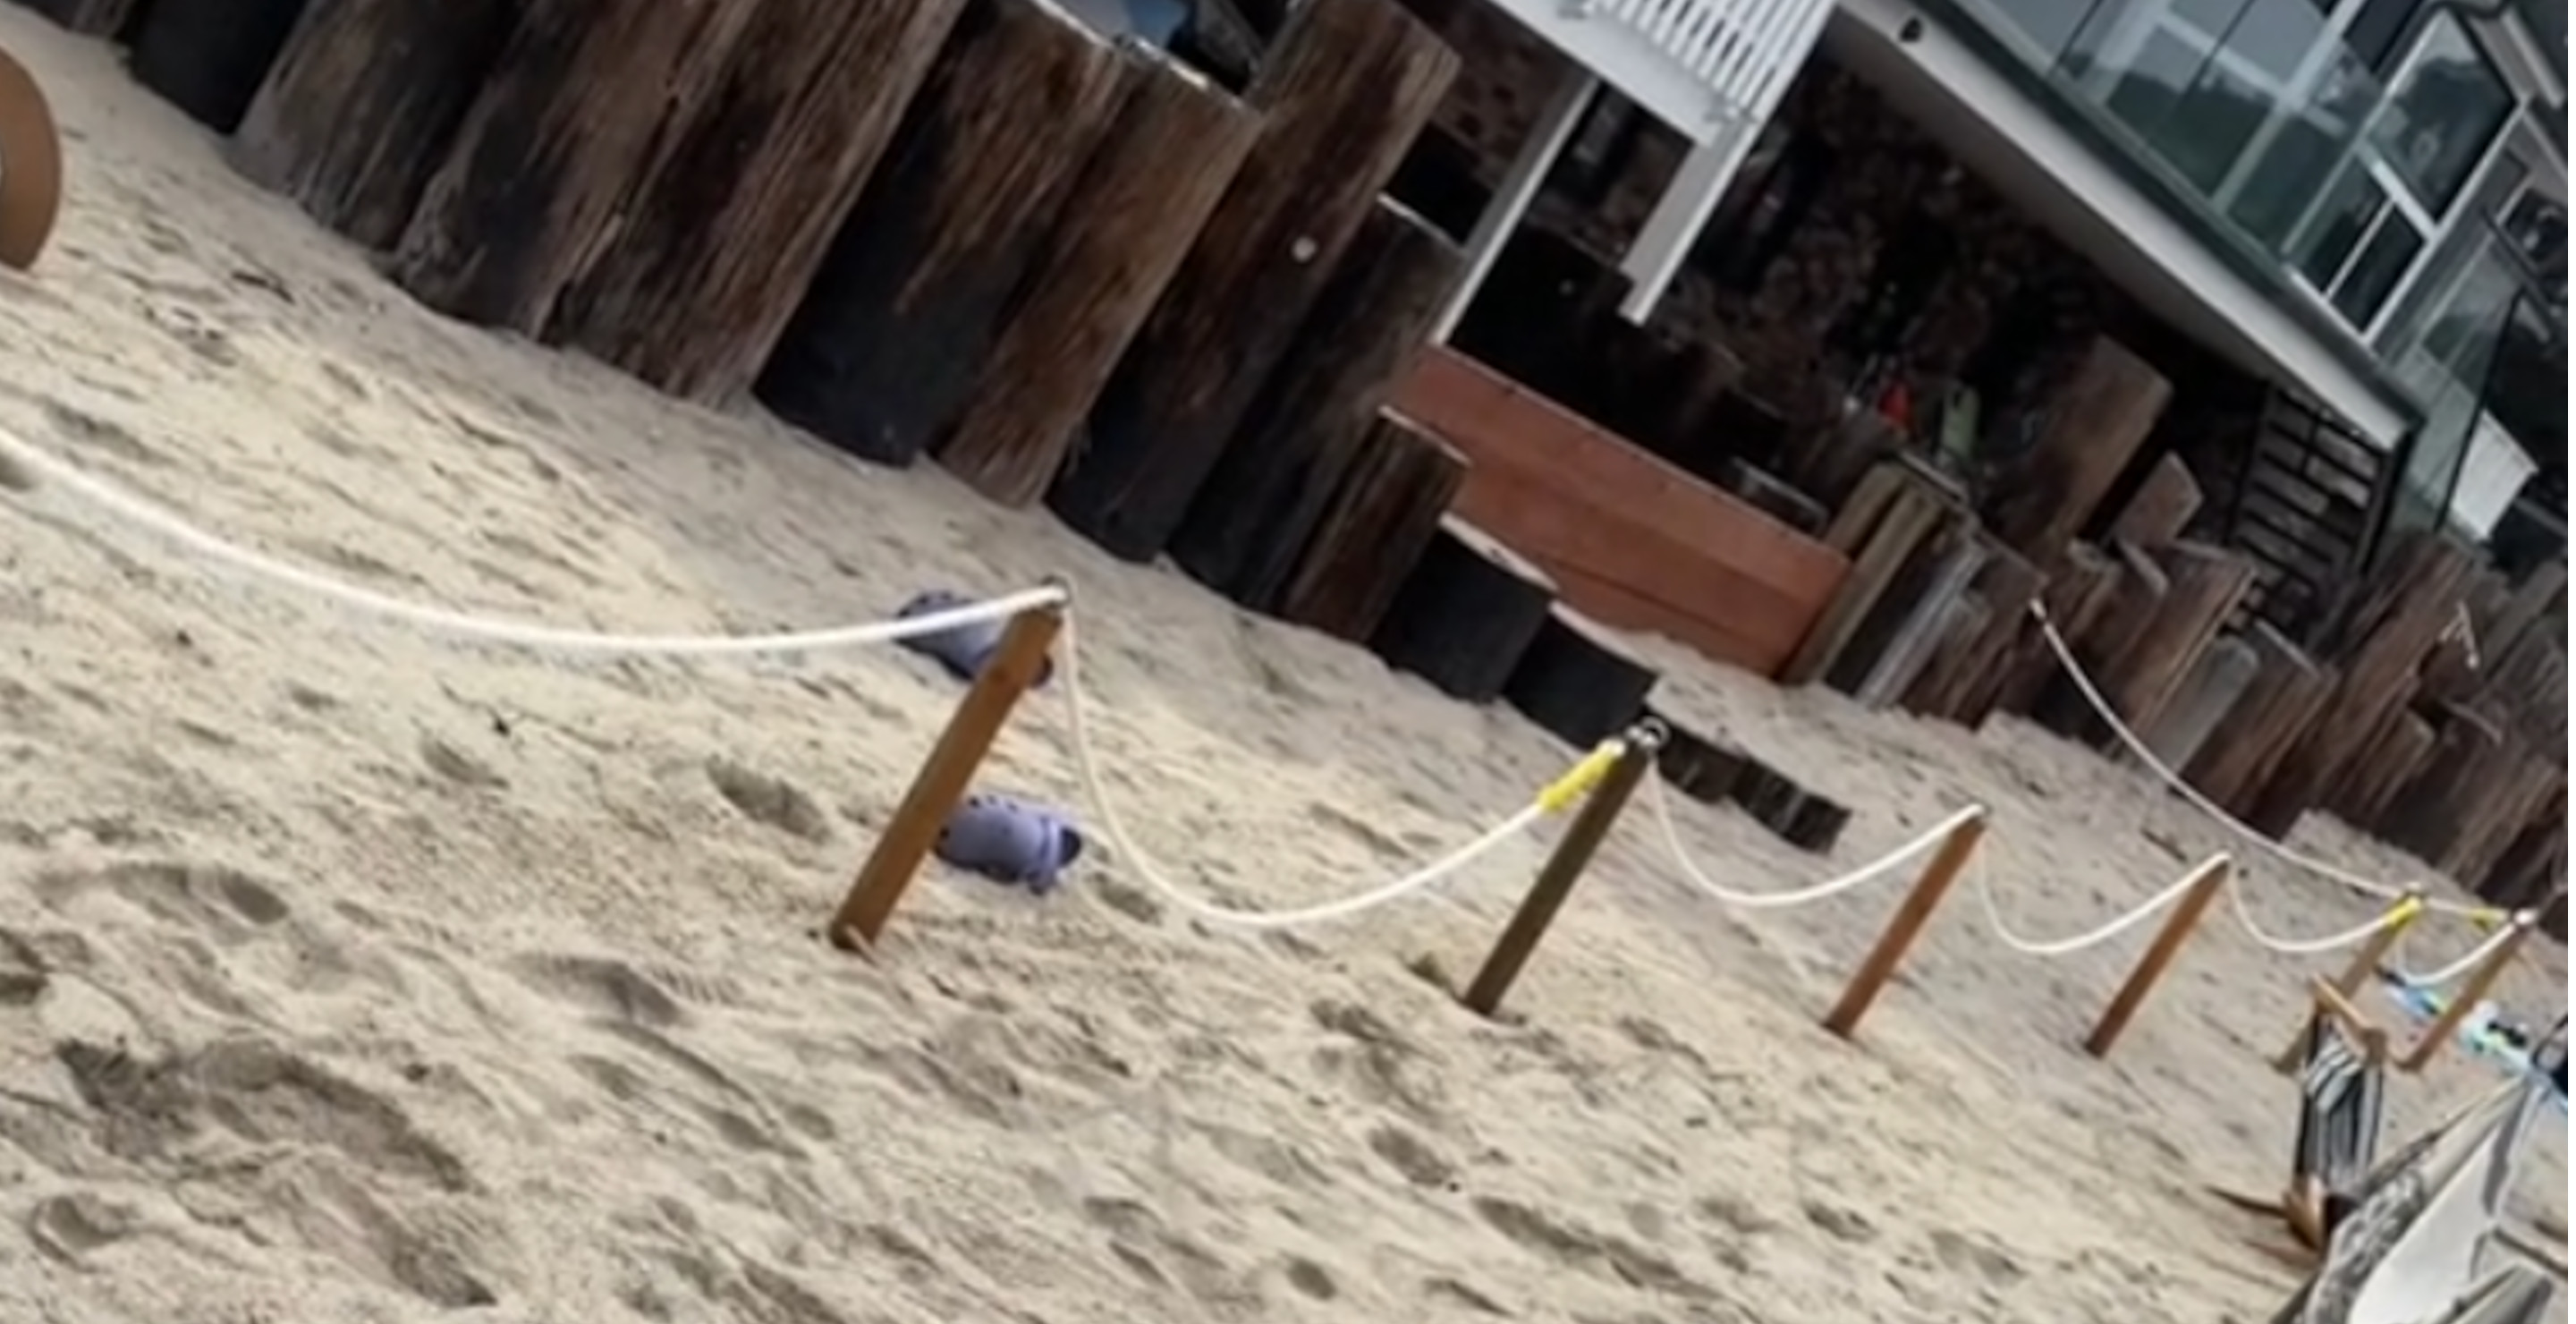 California Homeowner Ropes Off Public Beach, Claiming It Is Part Of Their Estate In Viral Video